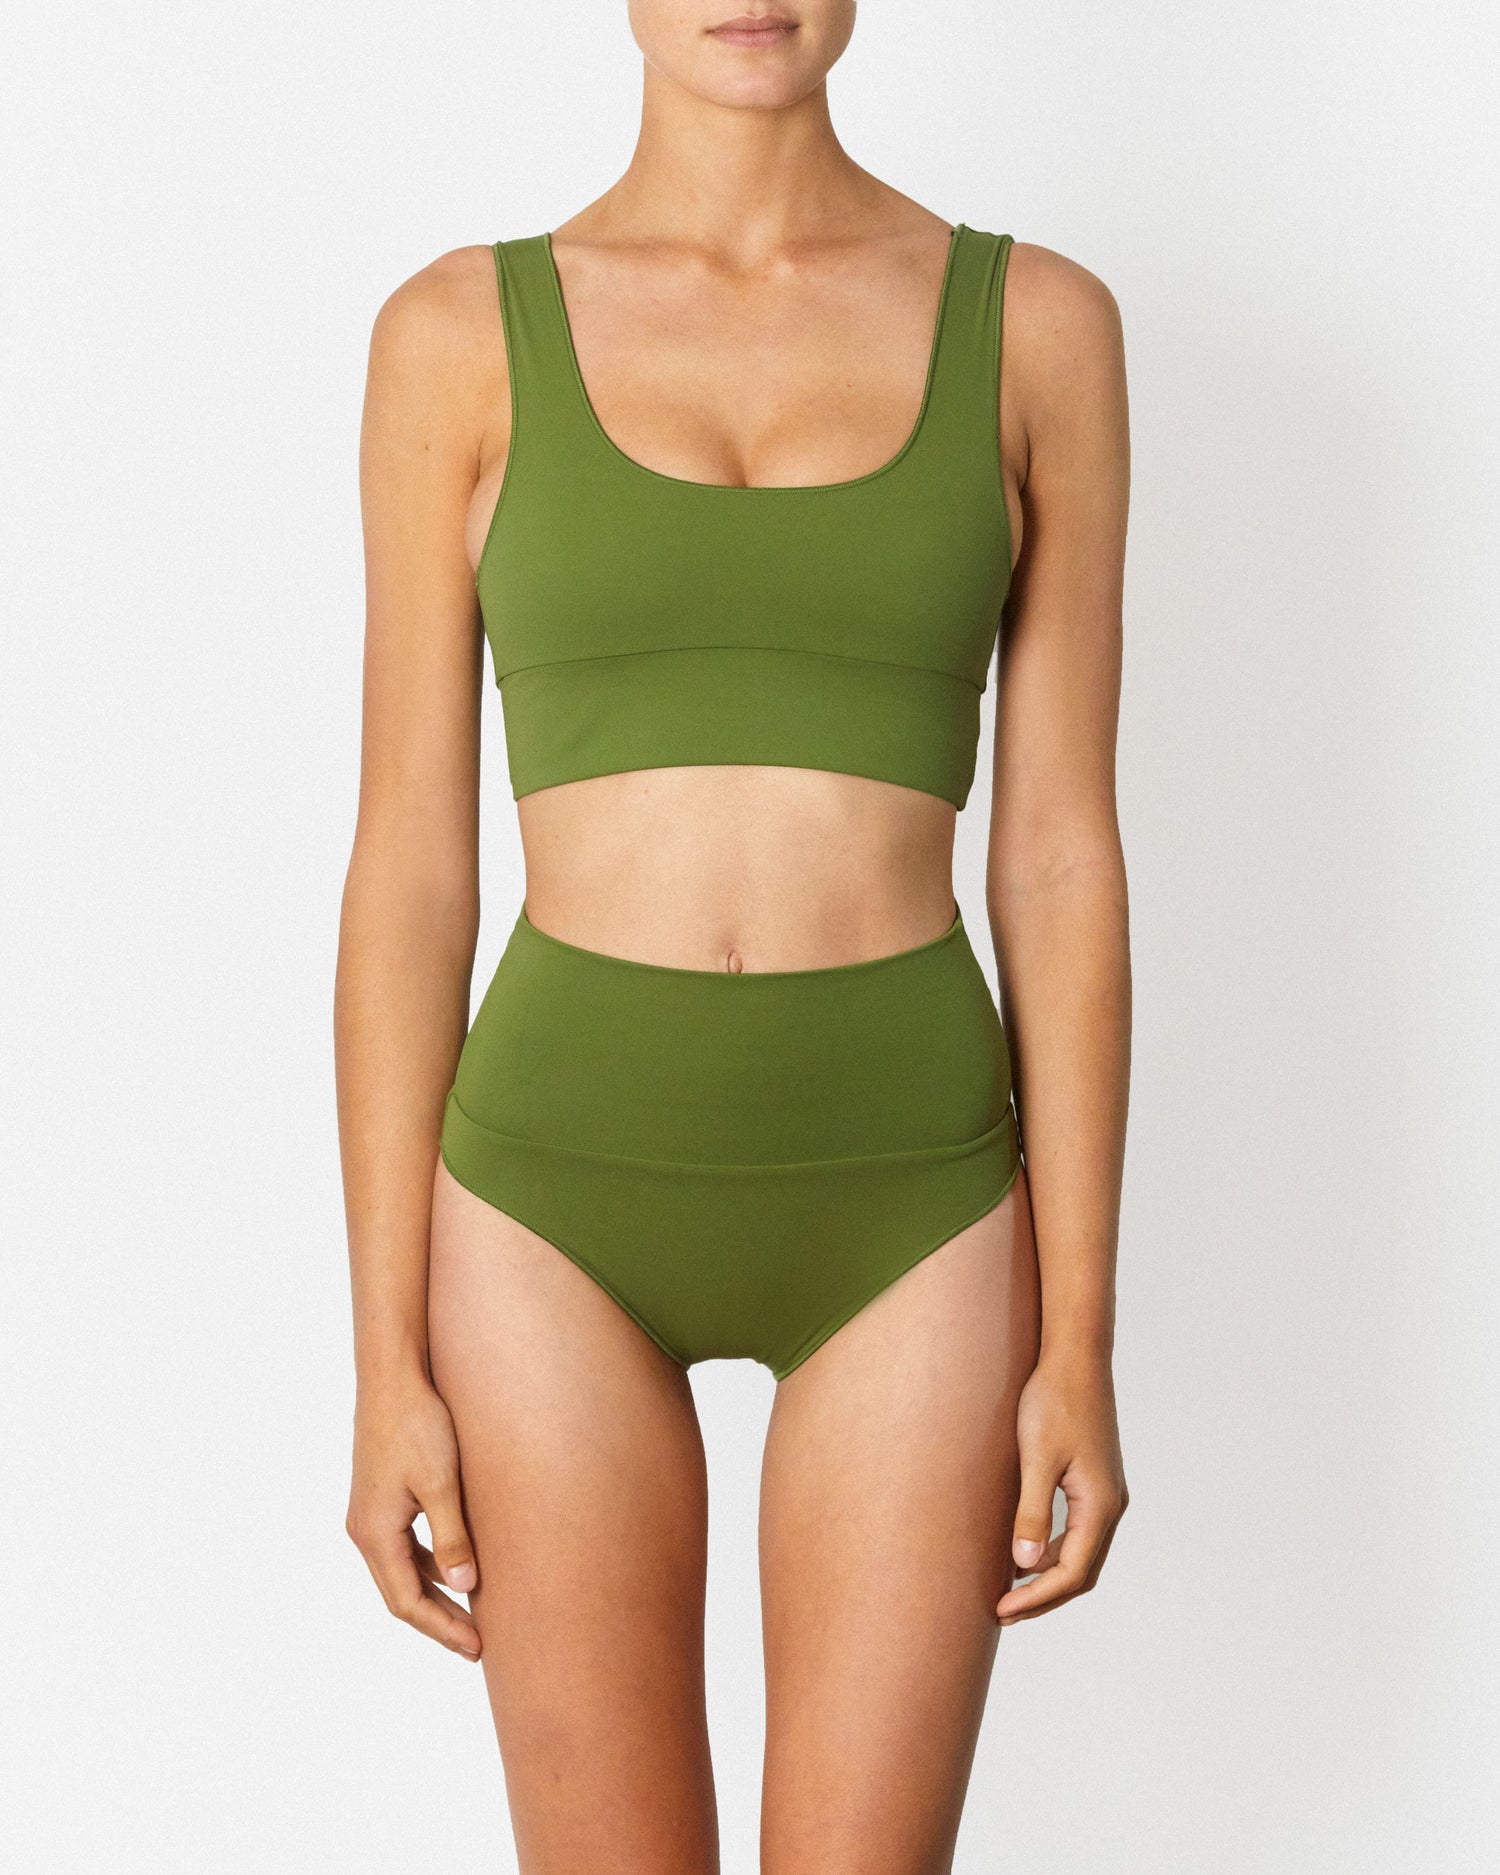 On body front of the Contour Crop Top - Pesto